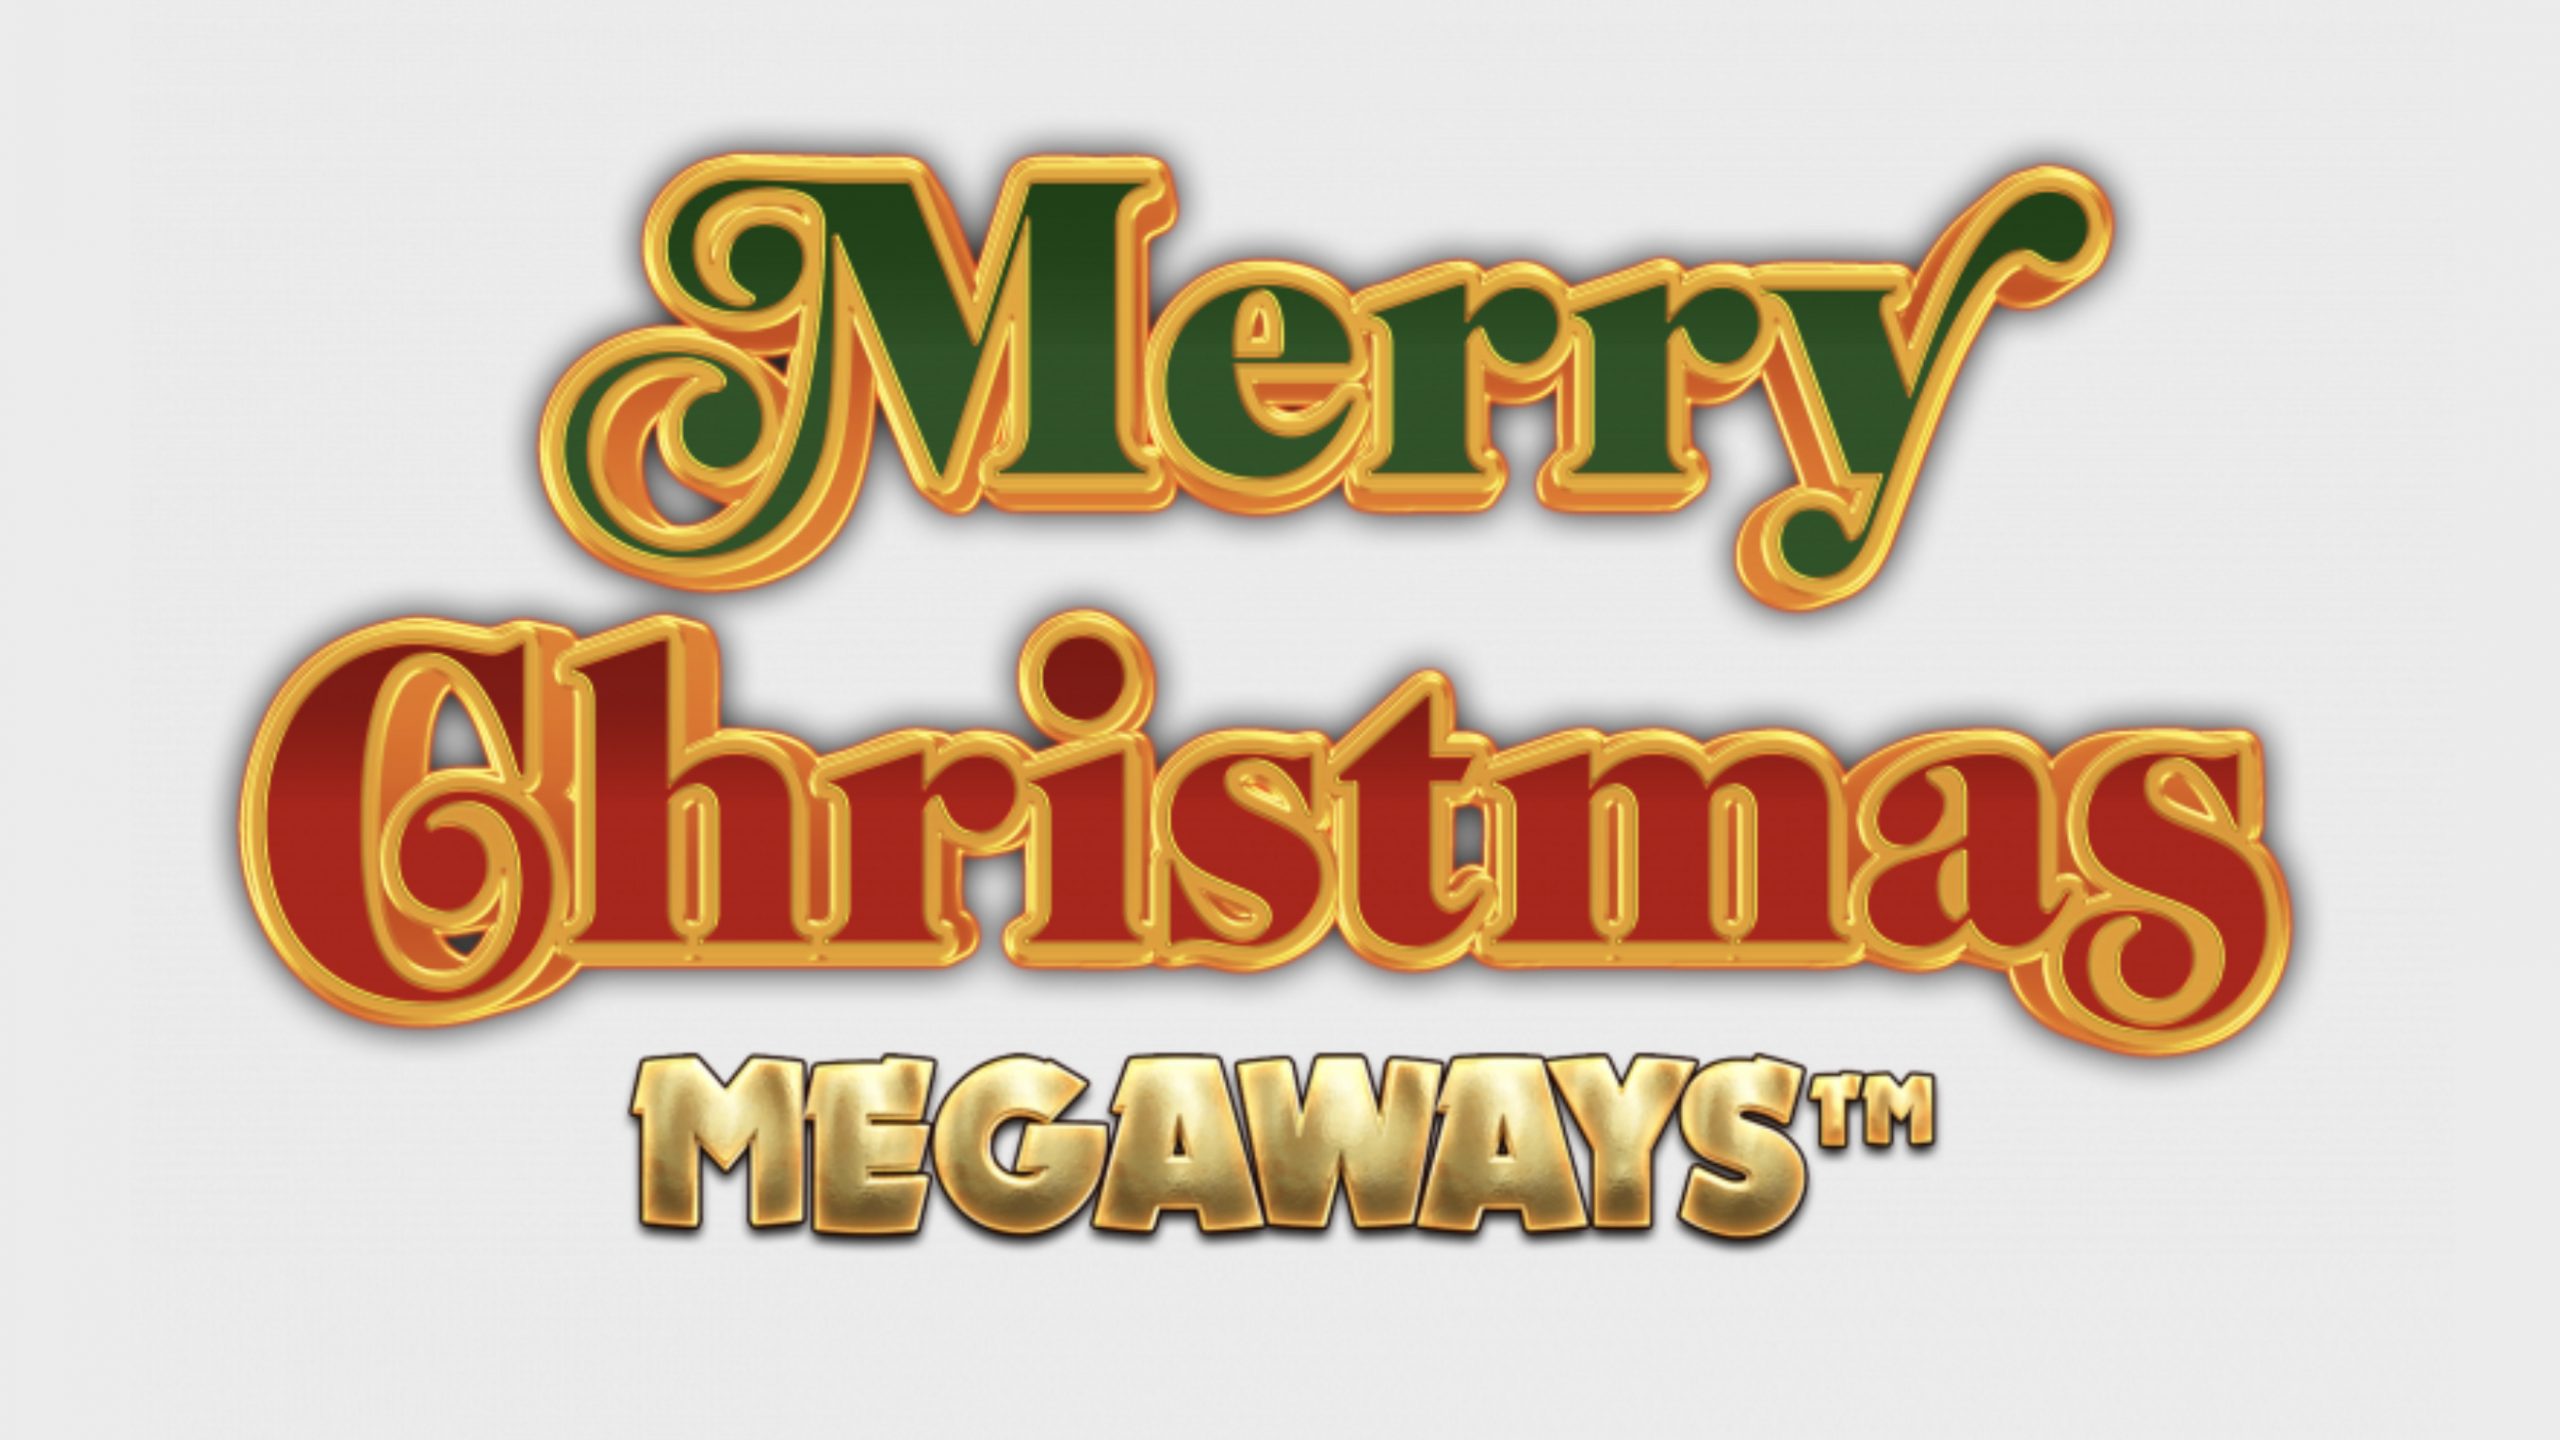 Merry Christmas Megaways is a 6x2-7, 117,649-payline video slot that comes with a maximum win potential of up to x25,000 the bet.